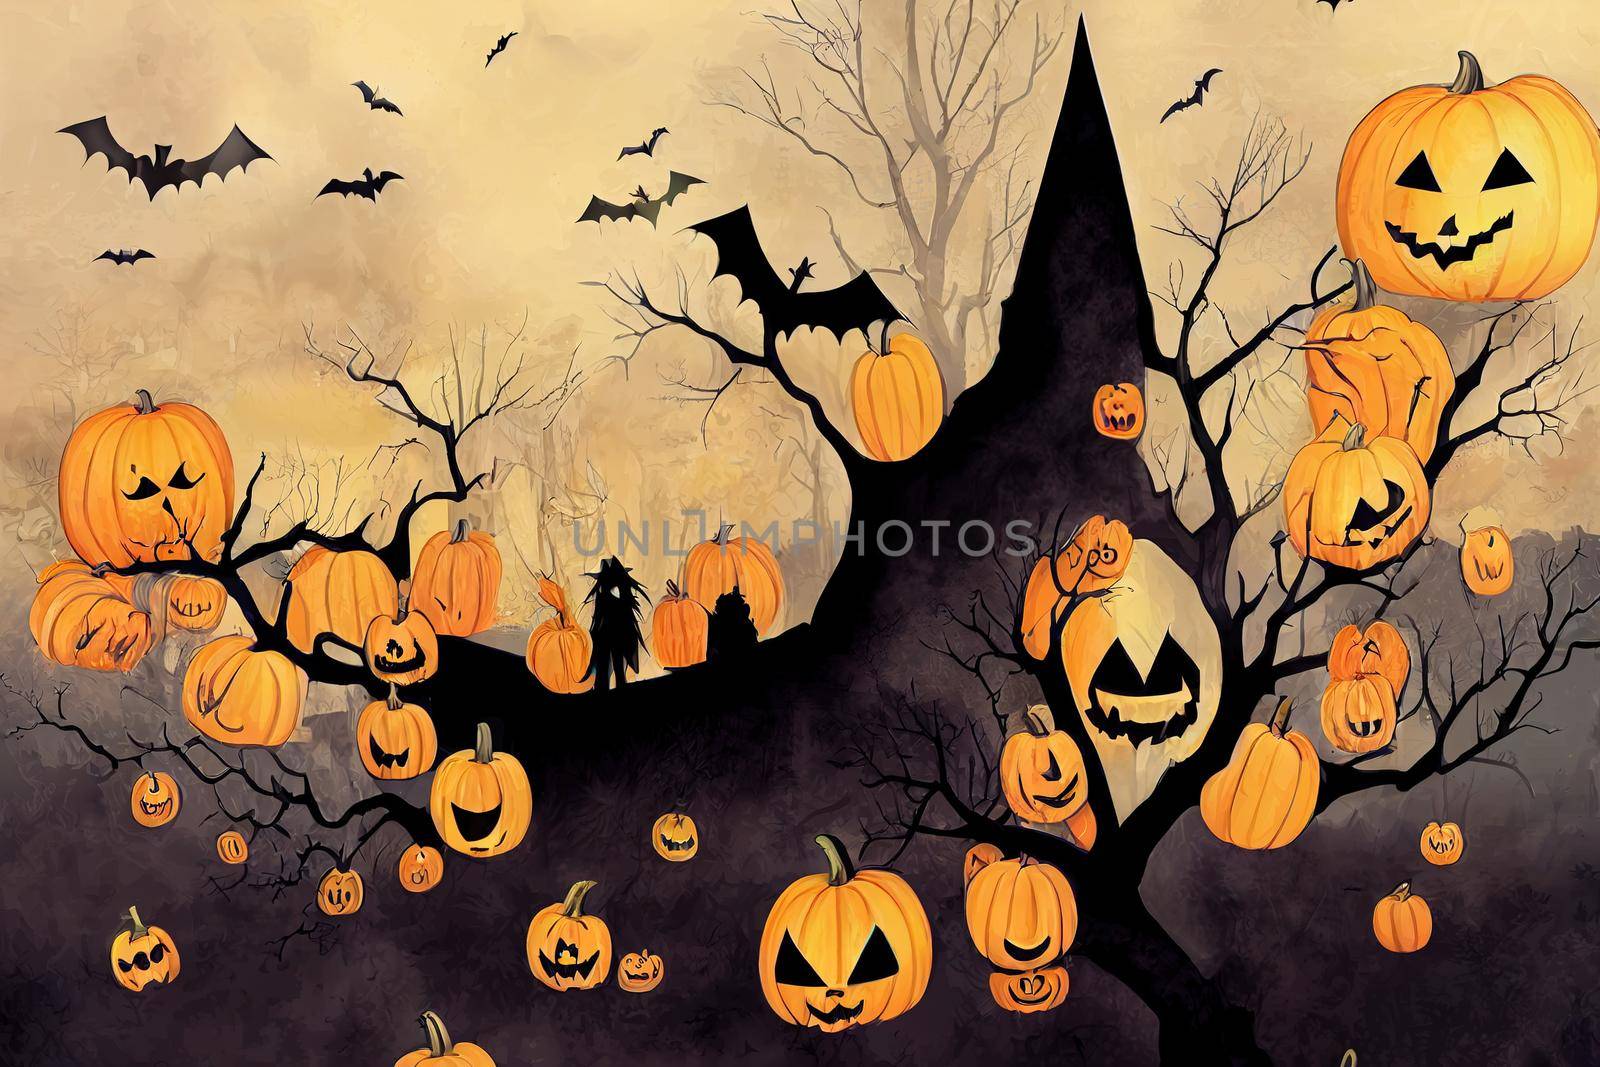 Garland Designs and Illustrations for Halloween ,toon style by 2ragon